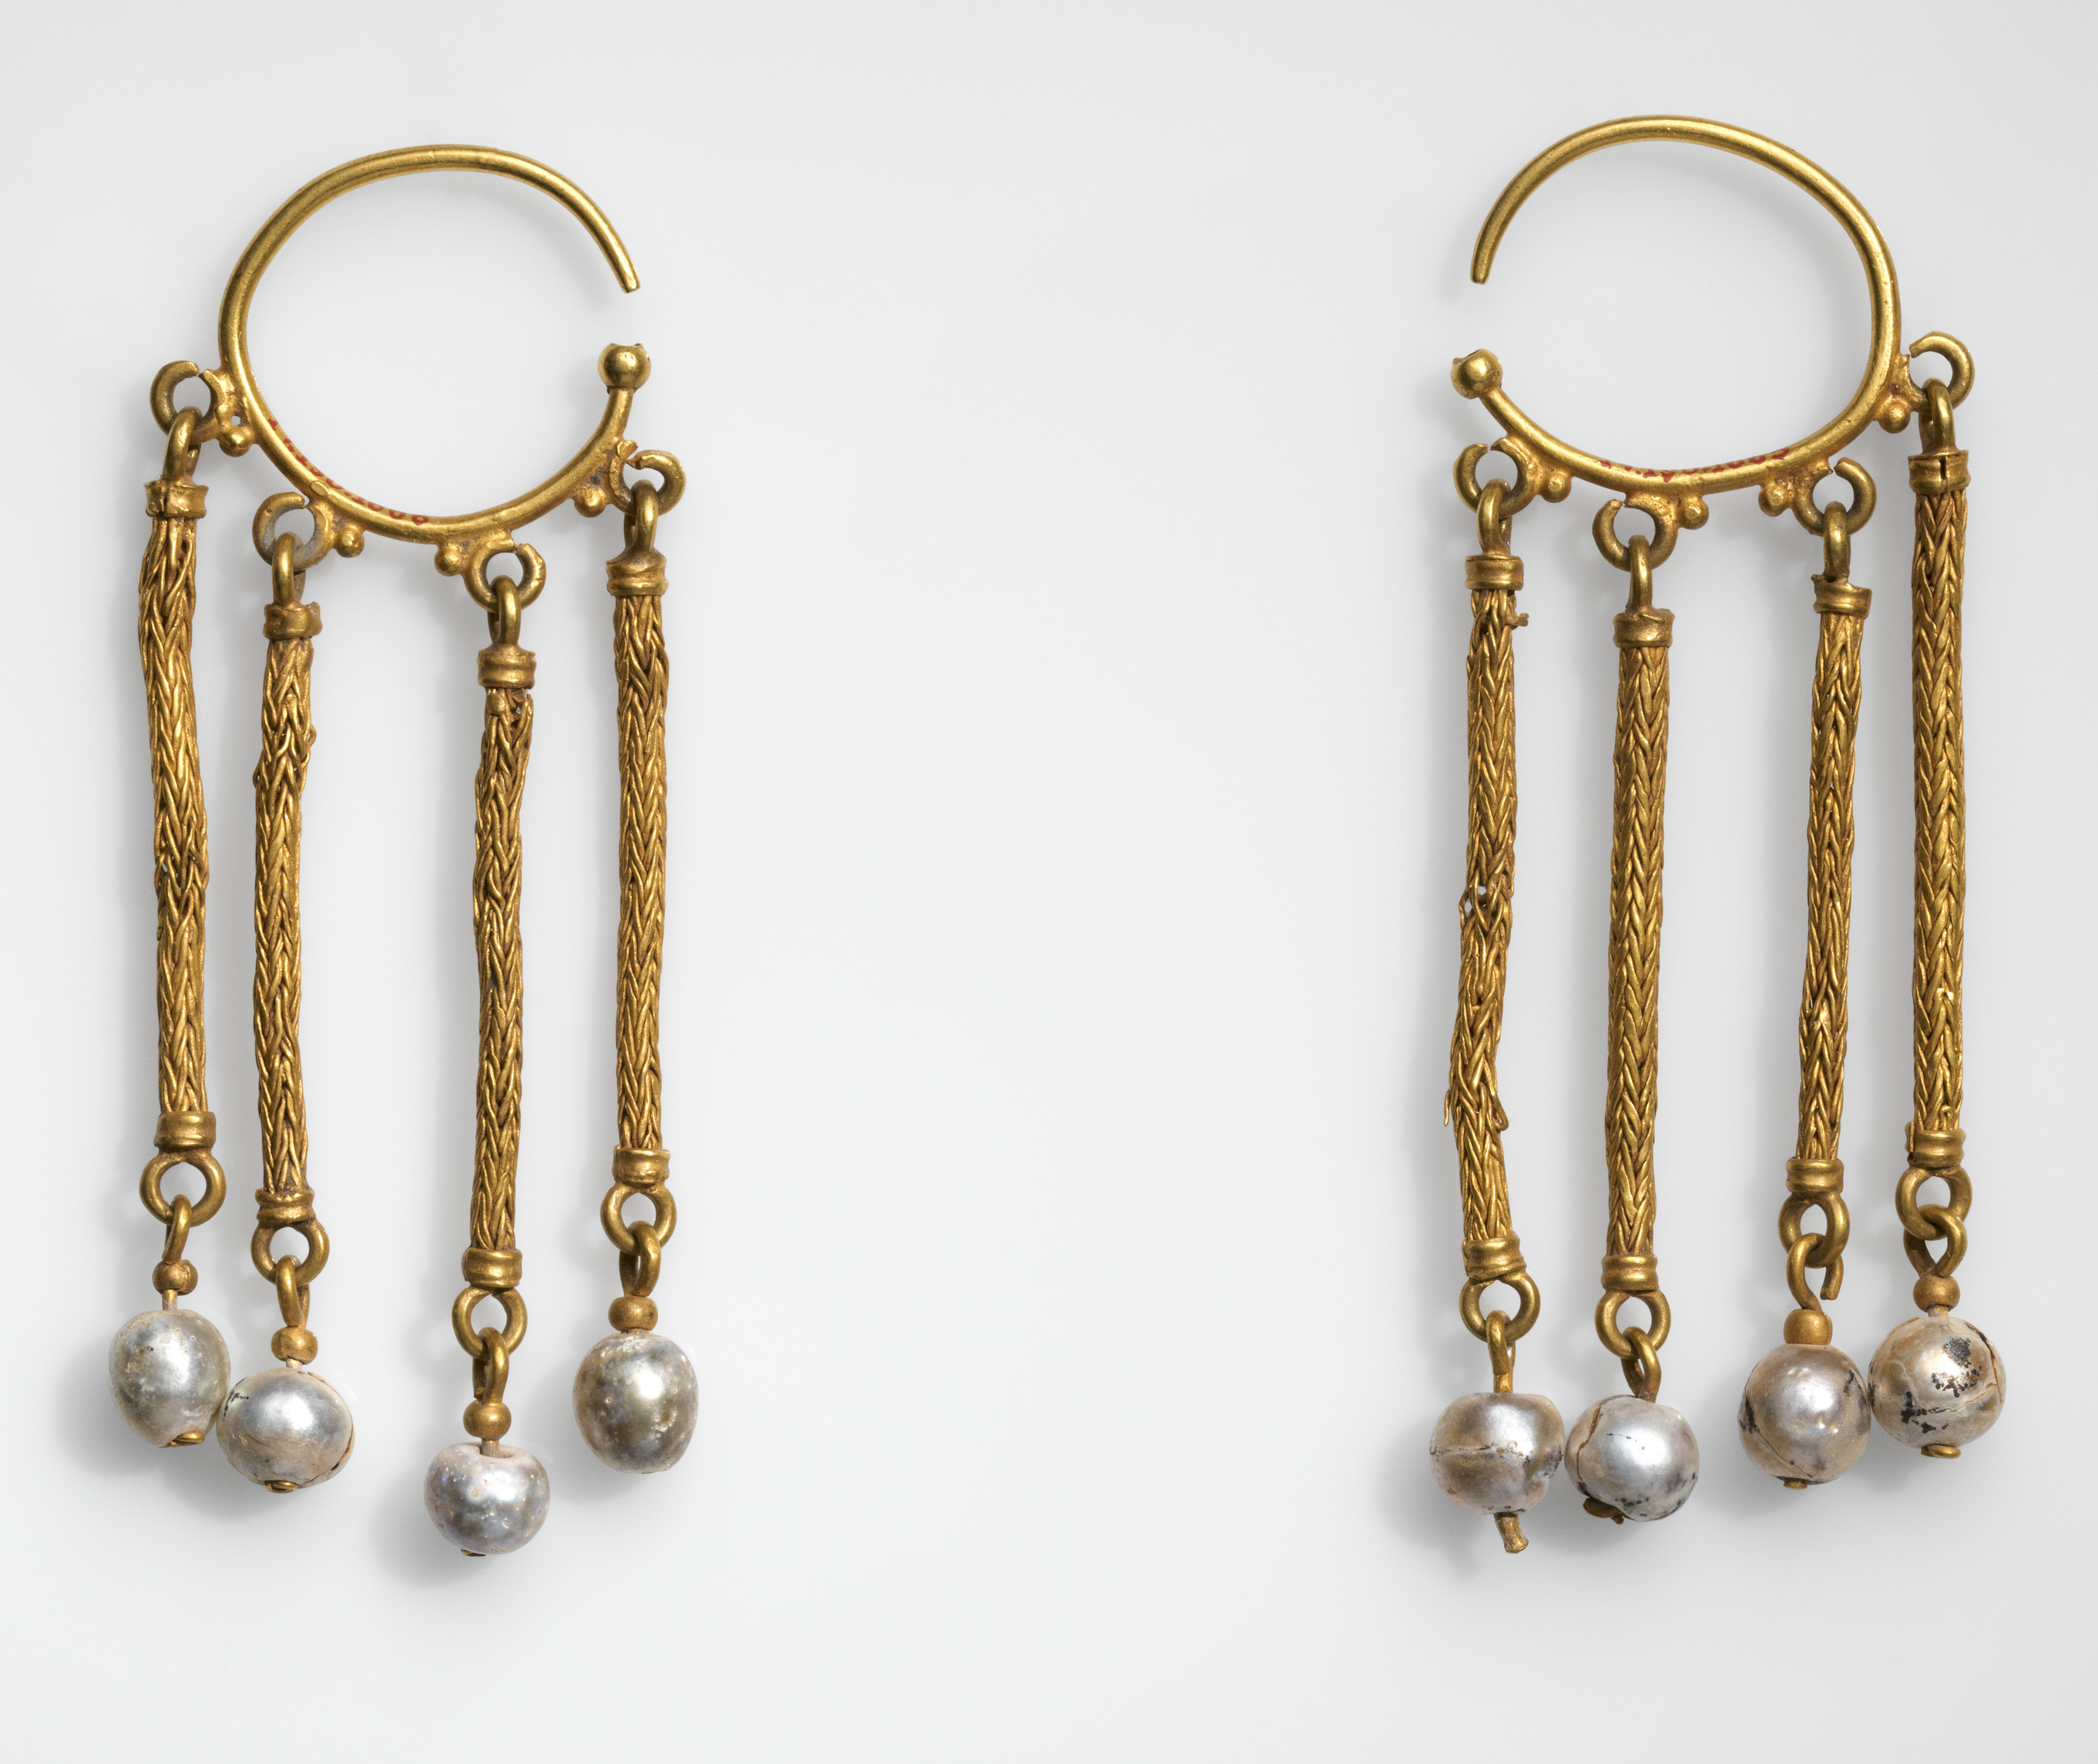 Byzantine earrings, gold and pearls, 6th-7th century, Metropolitan Museum of Art